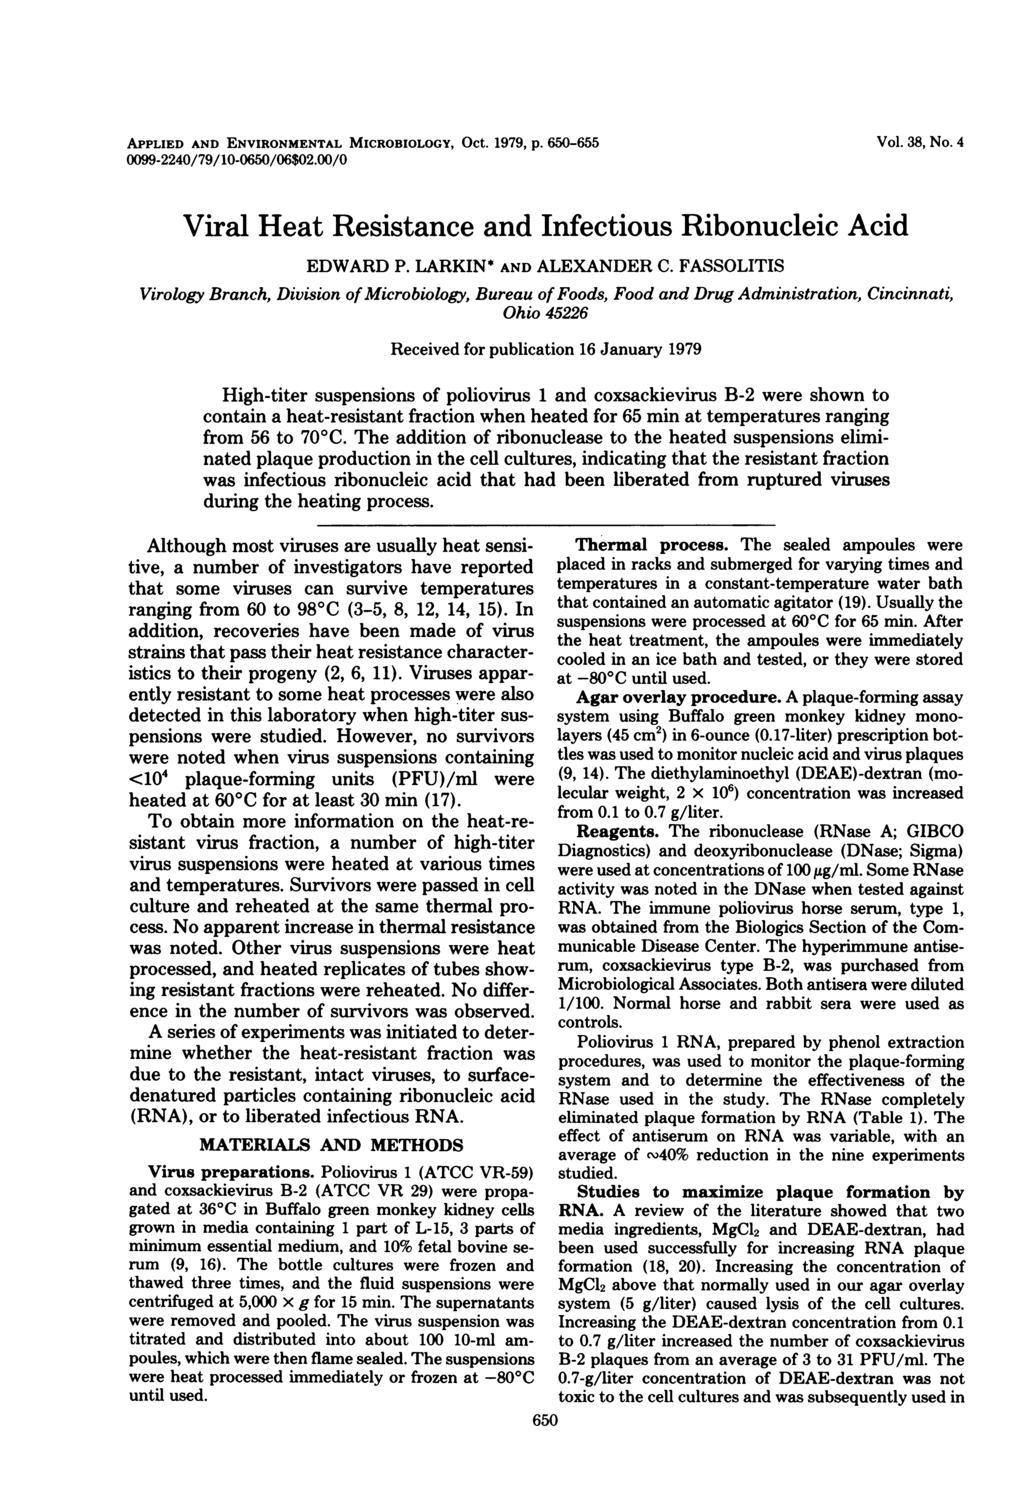 APPLIED AND ENVIRONMENTAL MICROBIOLOGY, Oct. 1979, p. 650-655 0099-2240/79/10-0650/06$02.00/0 Vol. 38, No. 4 Viral Heat Resistance and Infectious Ribonucleic Acid EDWARD P. LARKIN* AND ALEXANDER C.